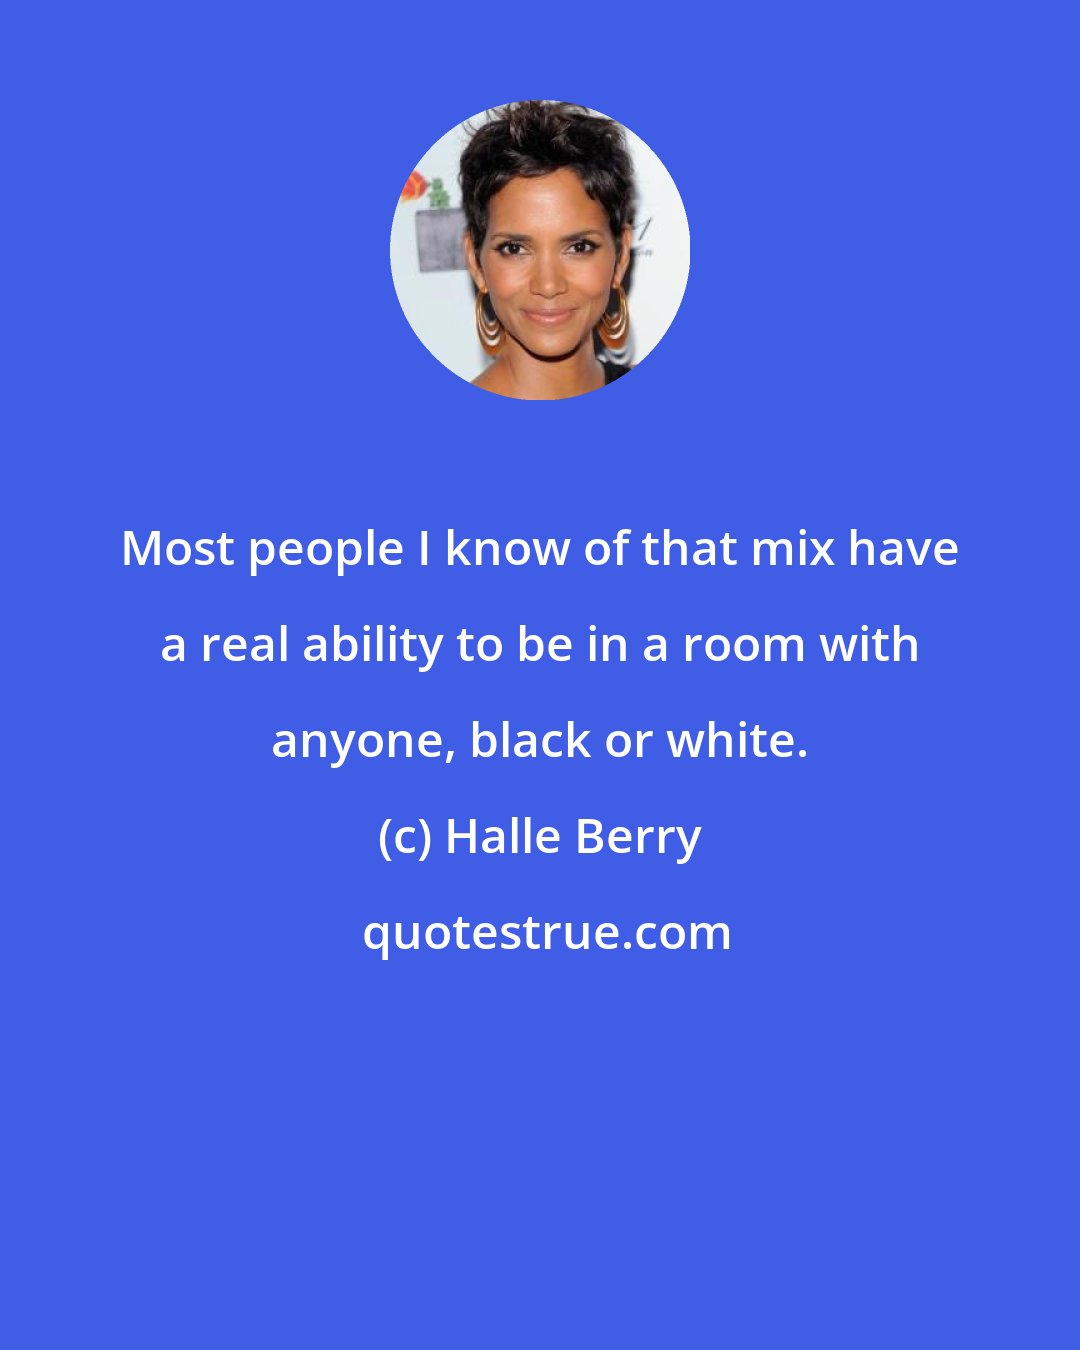 Halle Berry: Most people I know of that mix have a real ability to be in a room with anyone, black or white.